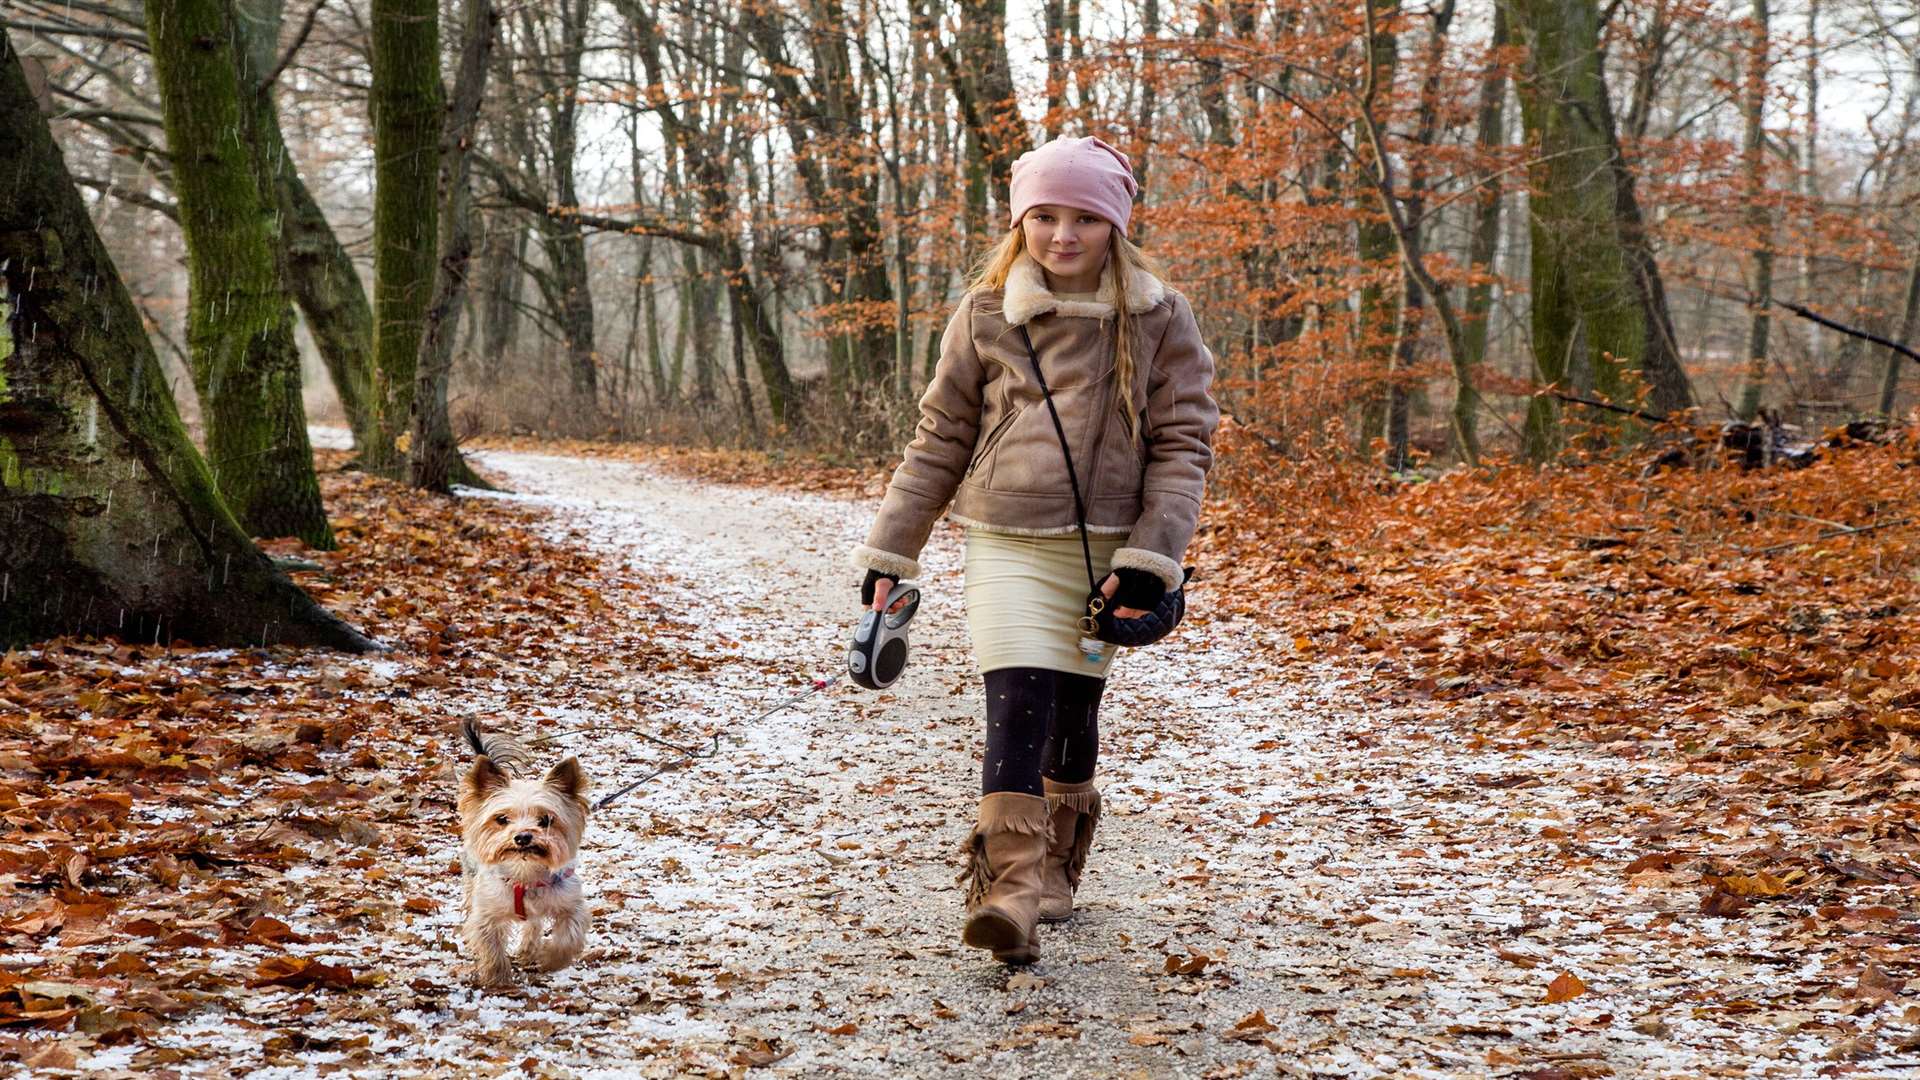 Take the dog on a family walk